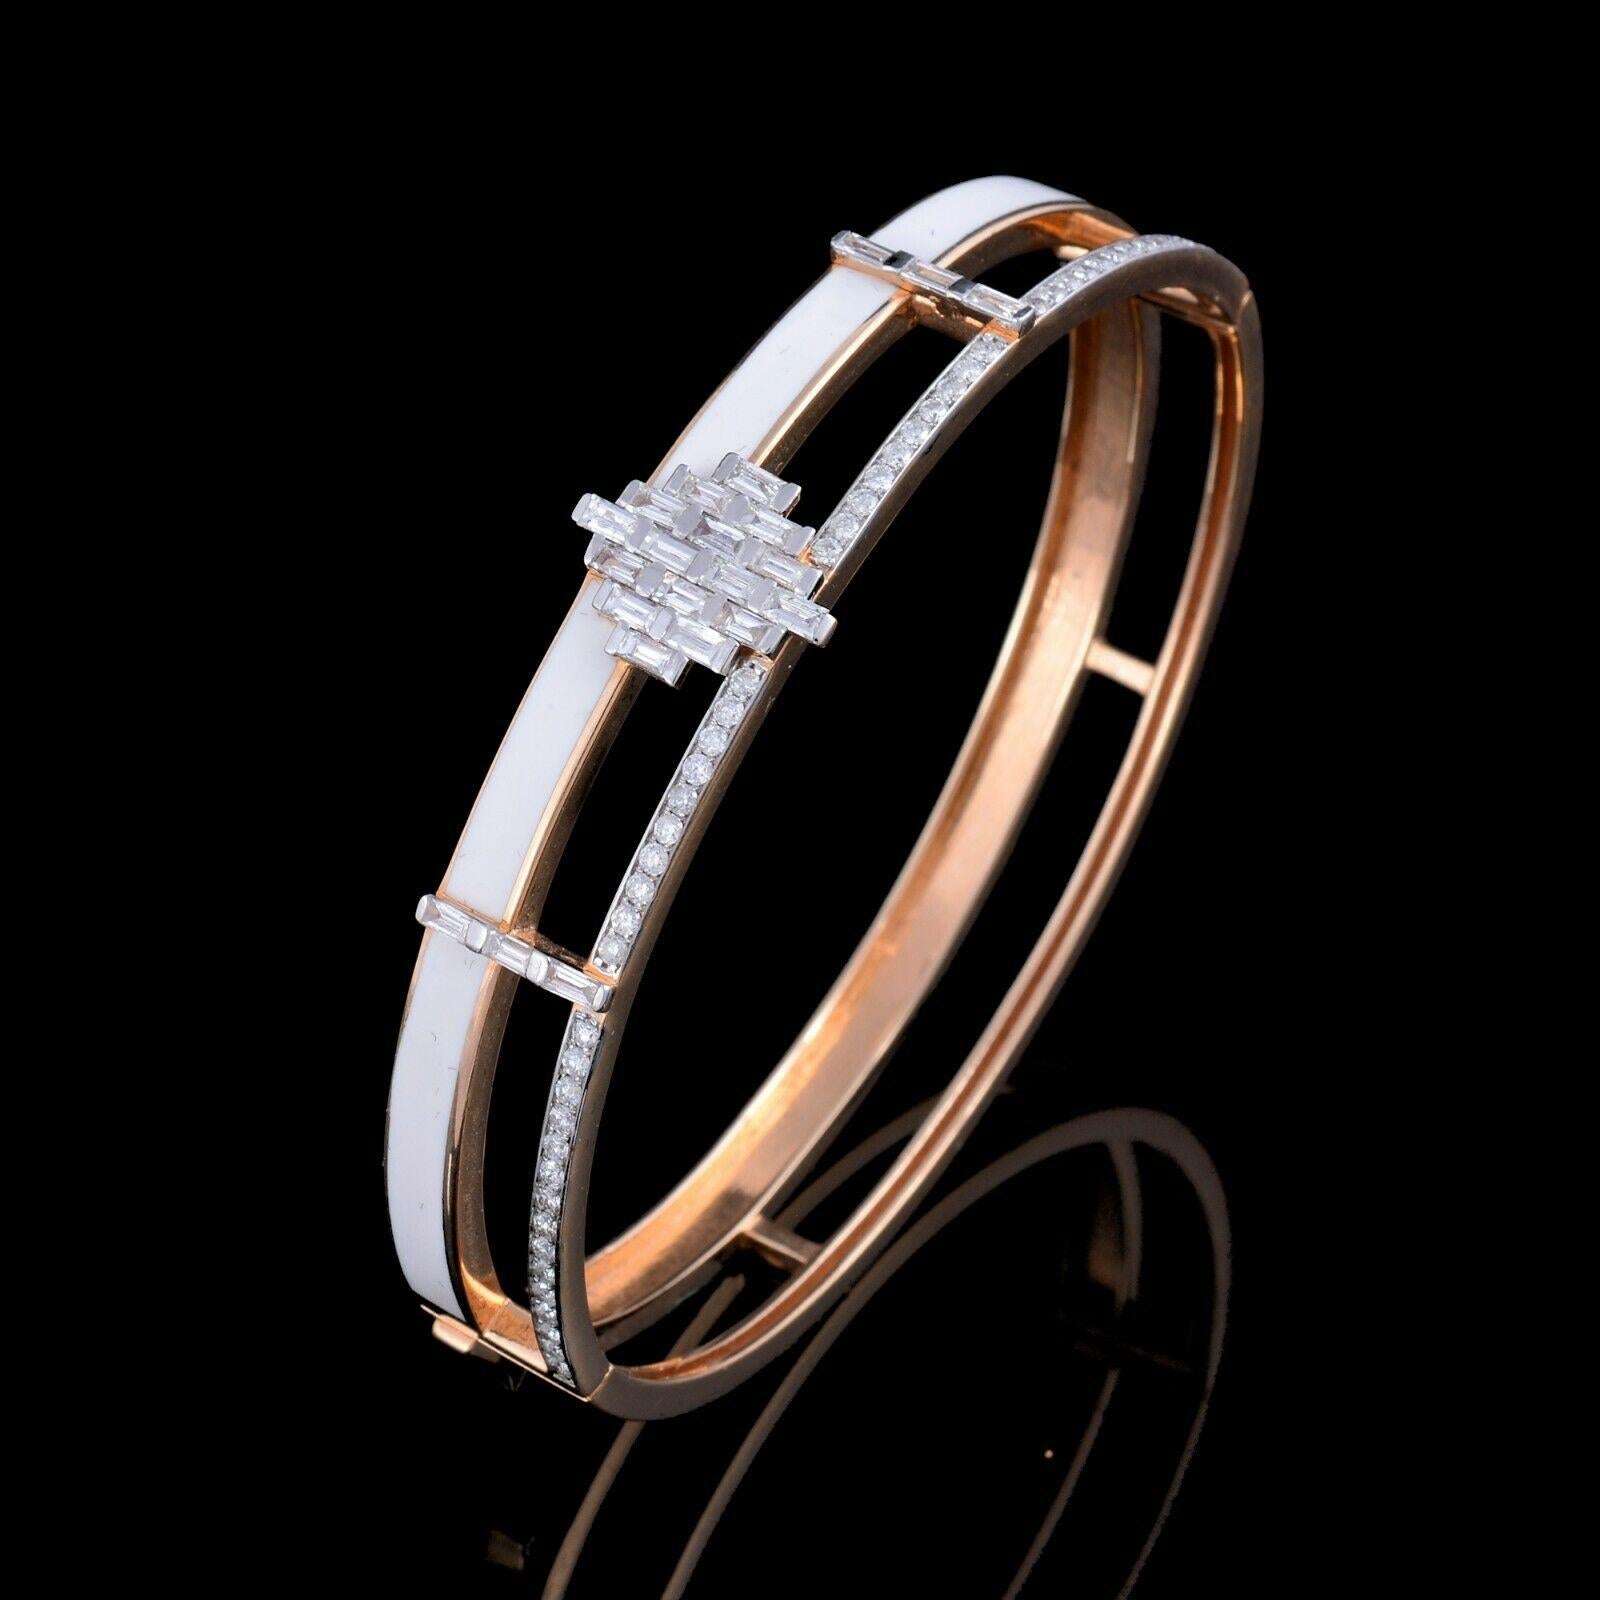 A white enamel bangle bracelet handmade in 14K rose gold & set in 1.95 carats of sparkling diamonds. We can also design in custom enamel color.

FOLLOW MEGHNA JEWELS storefront to view the latest collection & exclusive pieces. Meghna Jewels is